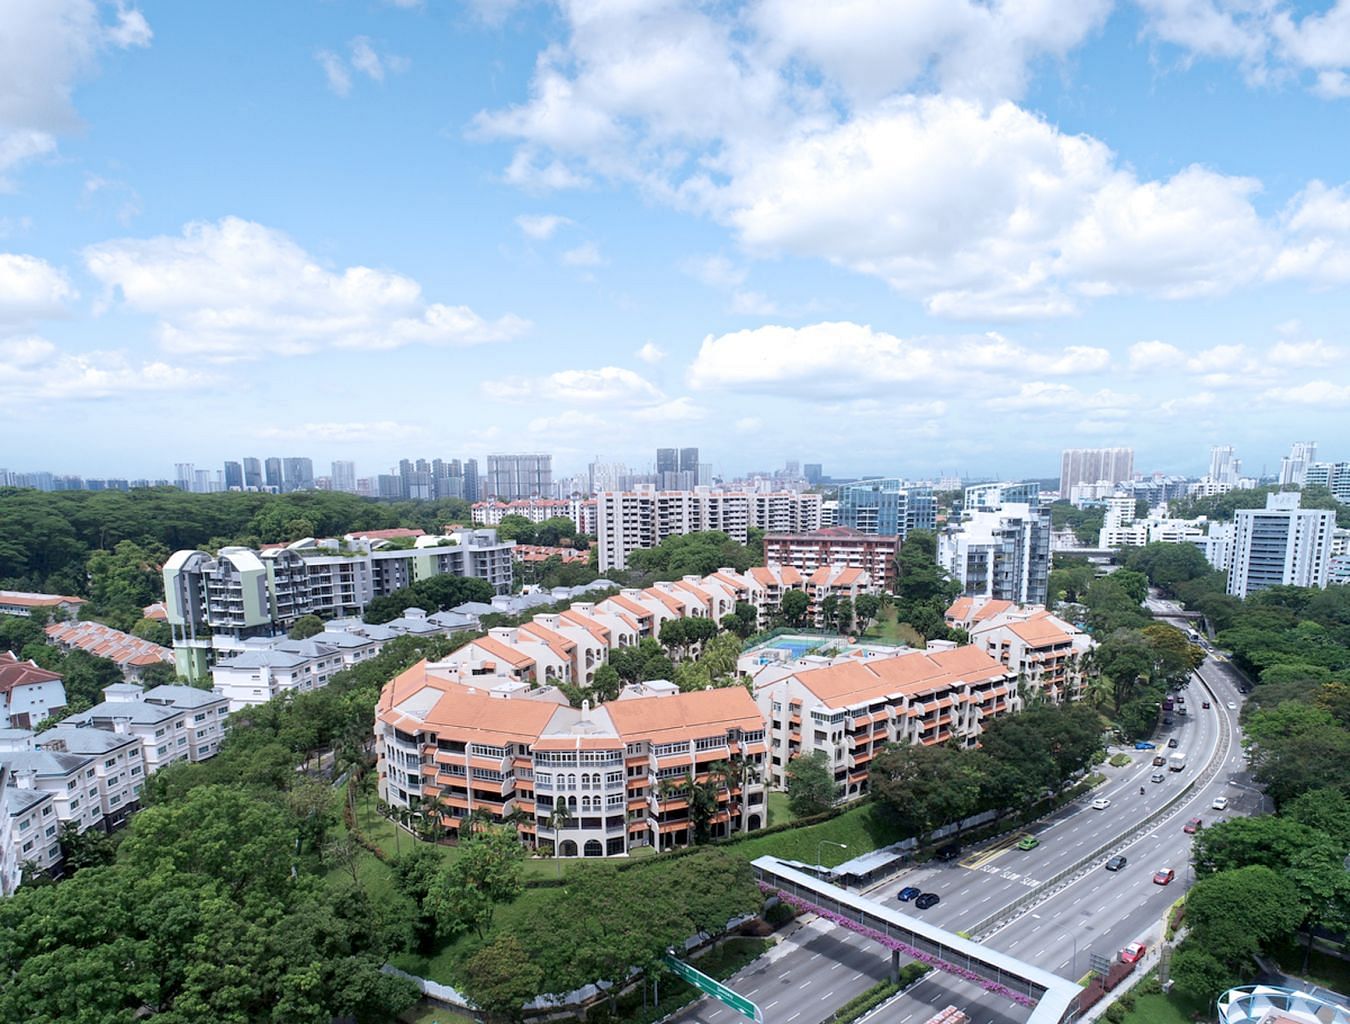 The owners of the 226-unit Spanish Village are working to lower the reserve price by about 6 per cent to $828 million from $882 million, says sole marketing agent Edmund Tie & Company. The development is in District 10 and located near the Botanic Gardens